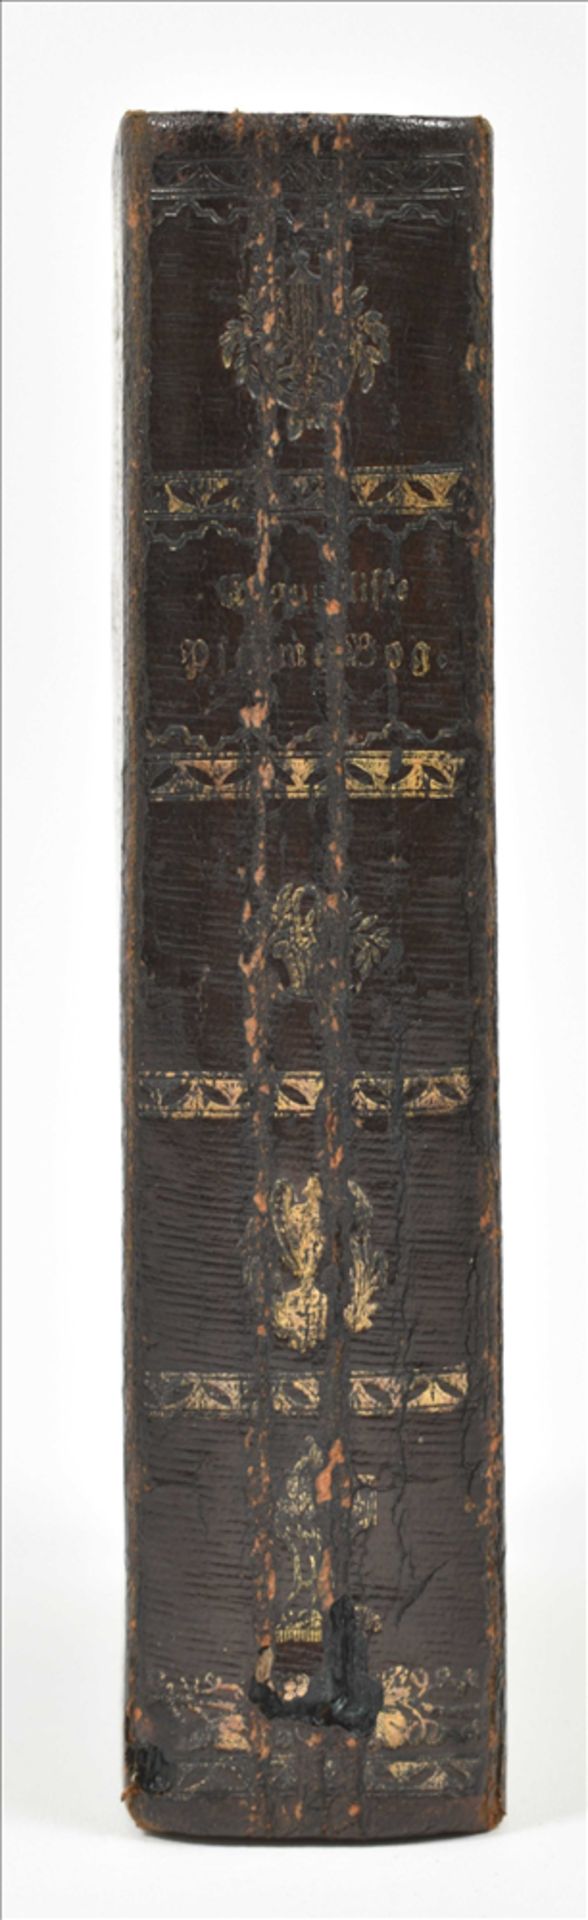 [Bindings] Early 19th century brown leather binding with two silver clasps and catches - Image 8 of 10